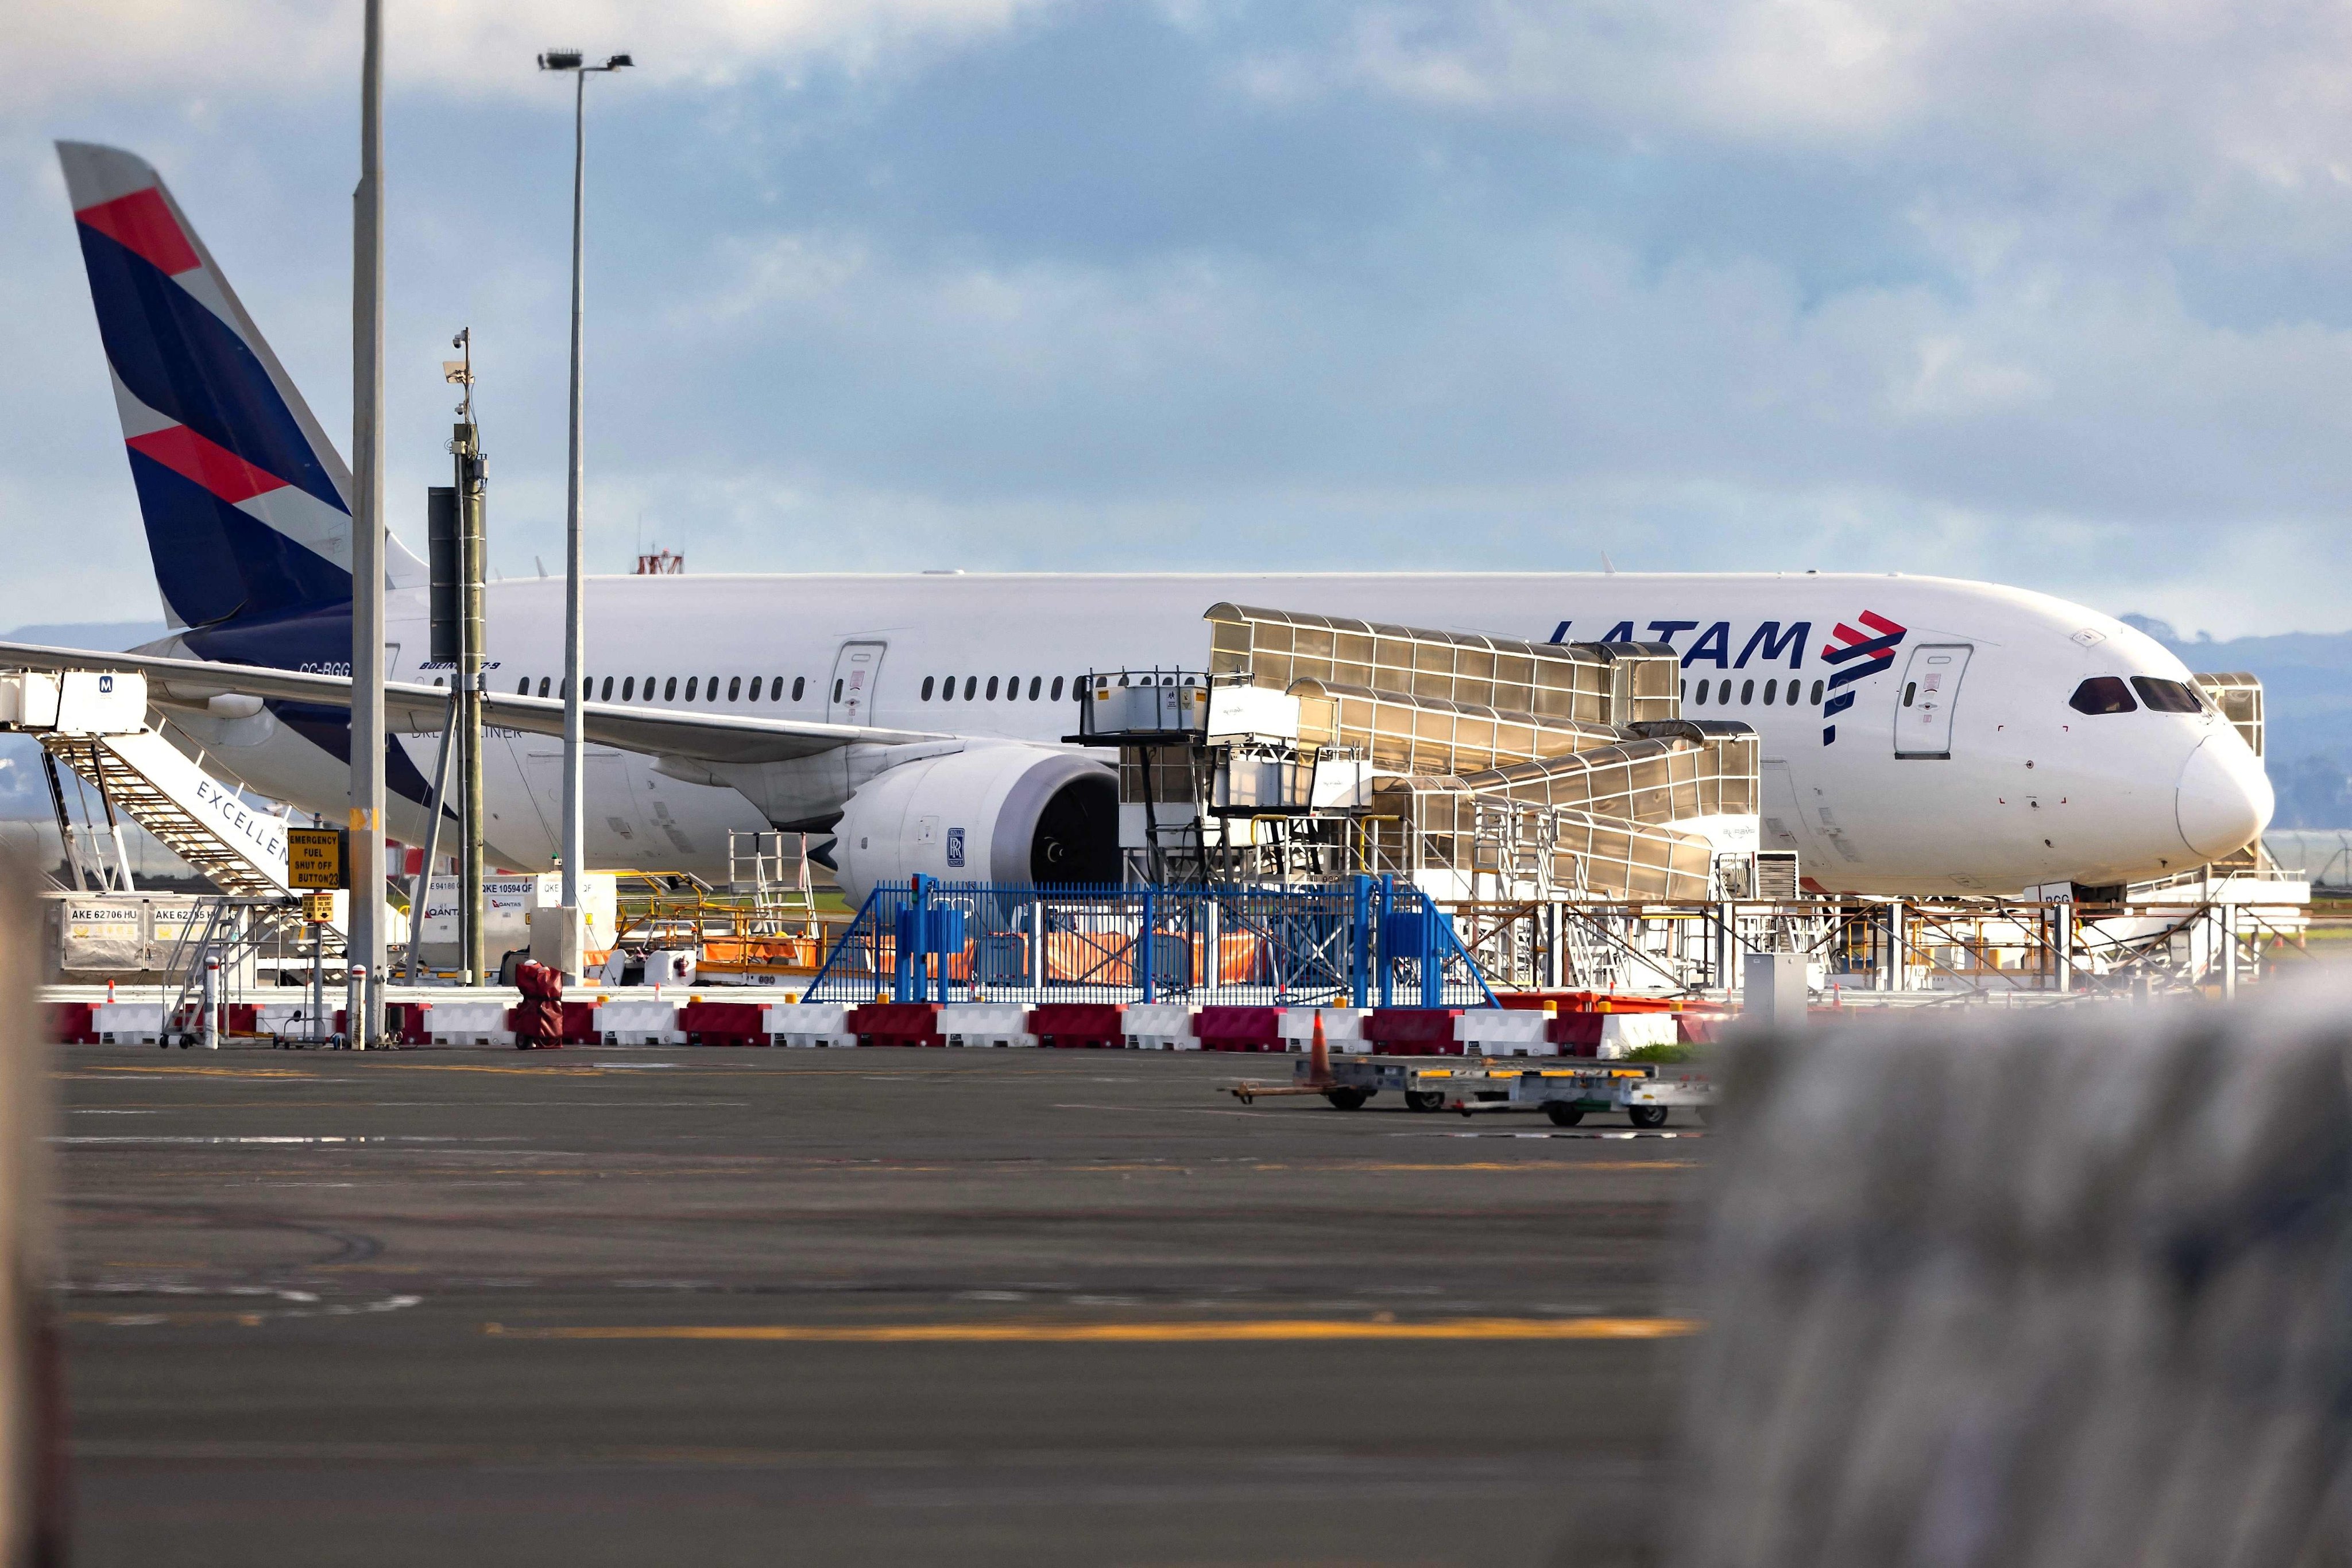 The Latam Airlines Boeing 787 Dreamliner plane that suddenly lost altitude mid-flight is parked on the tarmac of Auckland airport in New Zealand. Photo: AFP